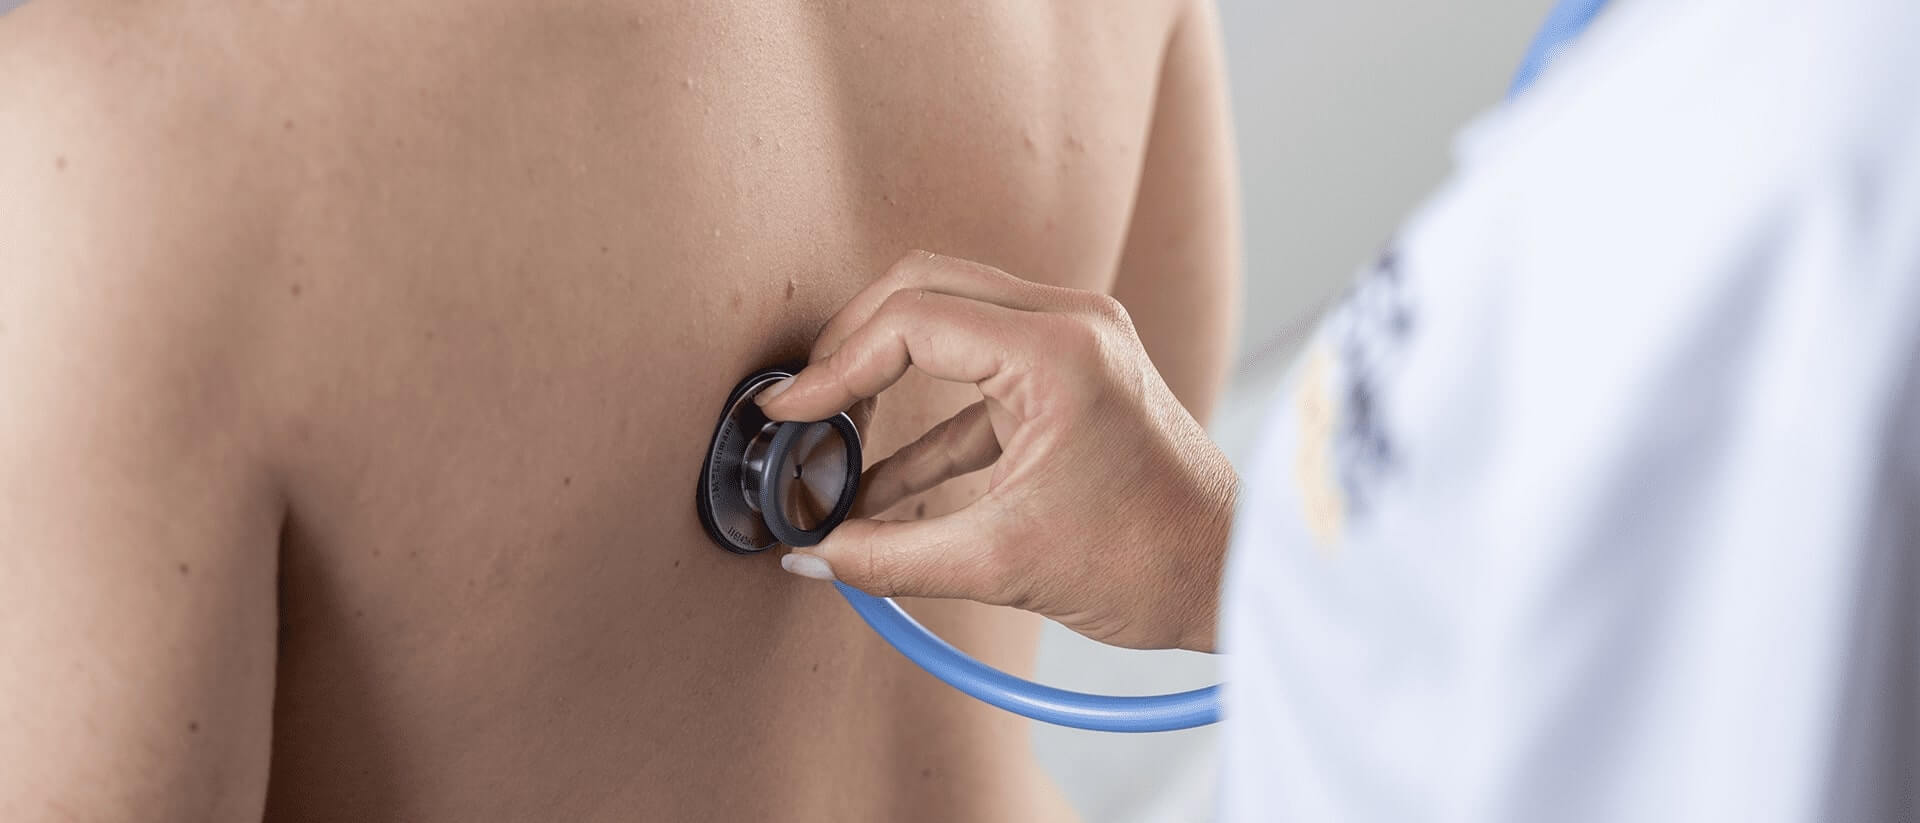 Doctor placing a stethoscope against a patient's back 